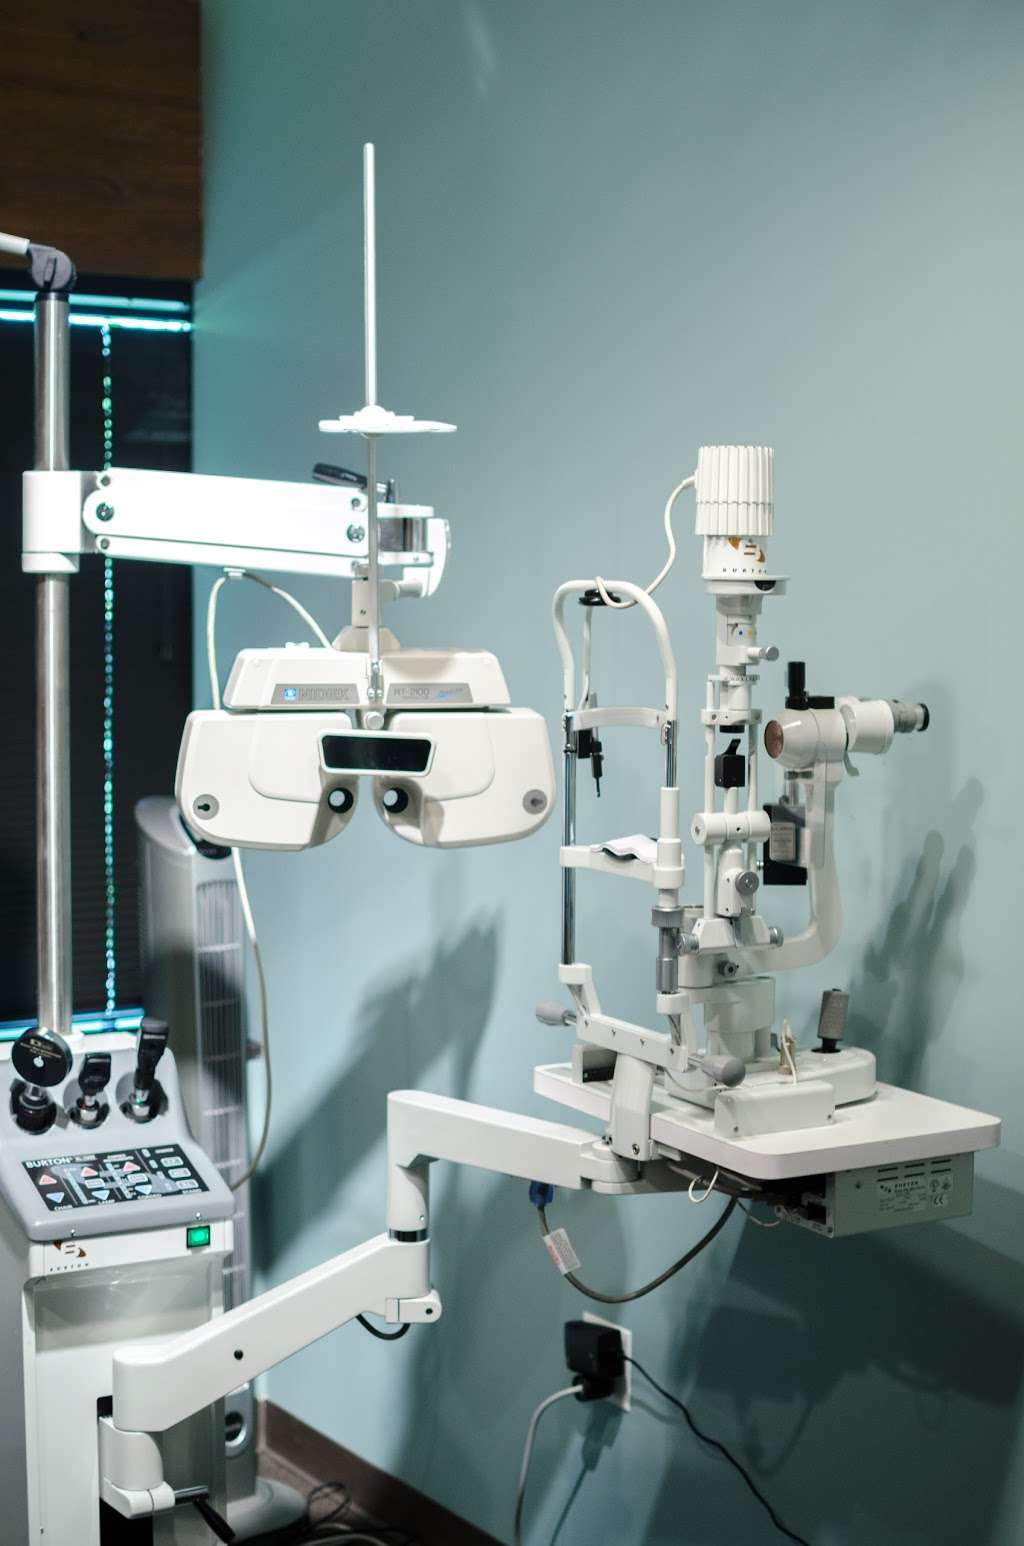 Coventry Eyecare Associates Ltd | 500 Coventry Ln #200, Crystal Lake, IL 60014, USA | Phone: (815) 459-5433